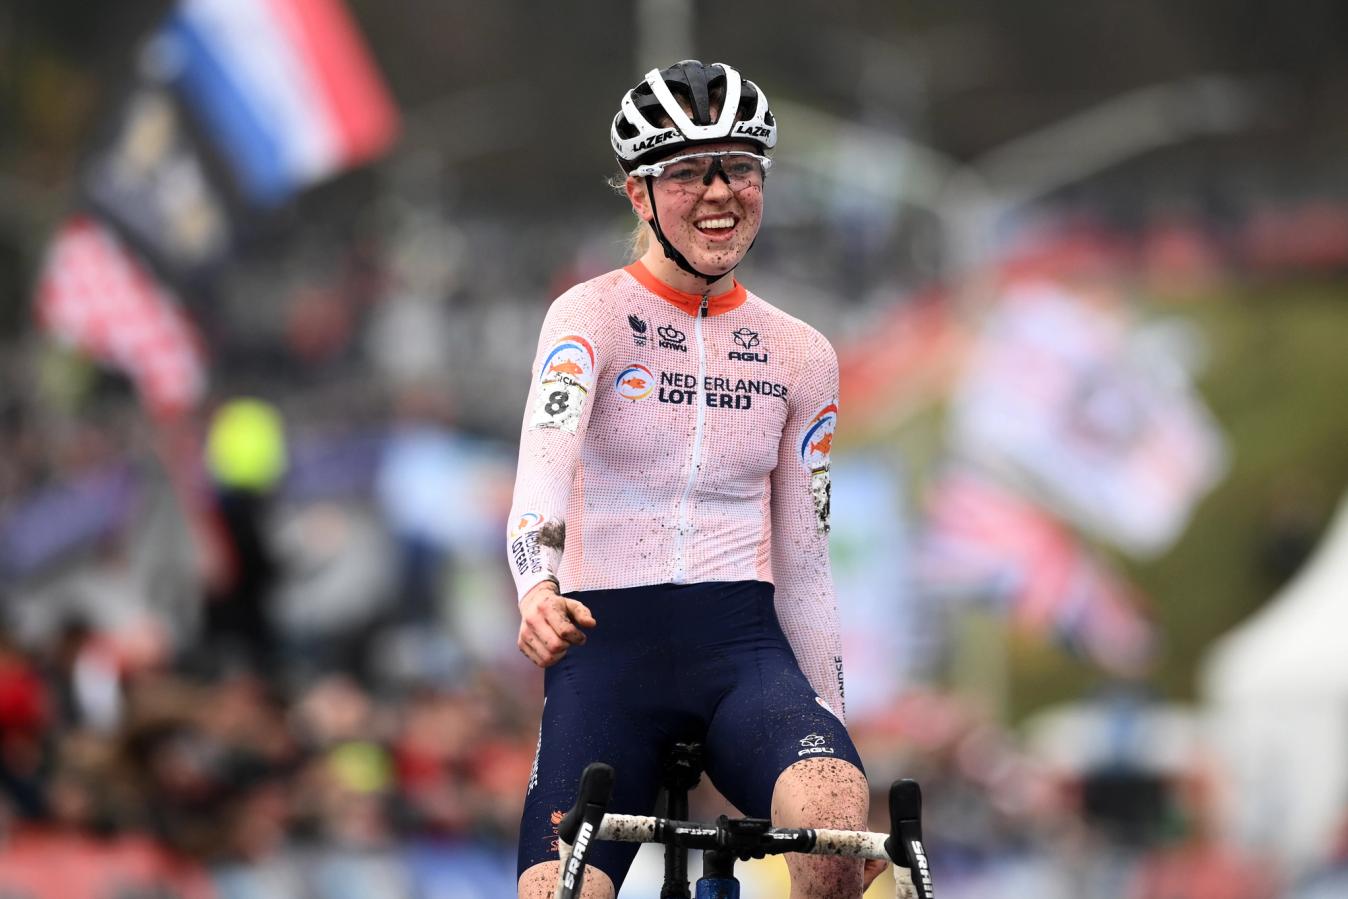 Fem van Empel won the World Cyclocross Championships for the Netherlands at the start of the year